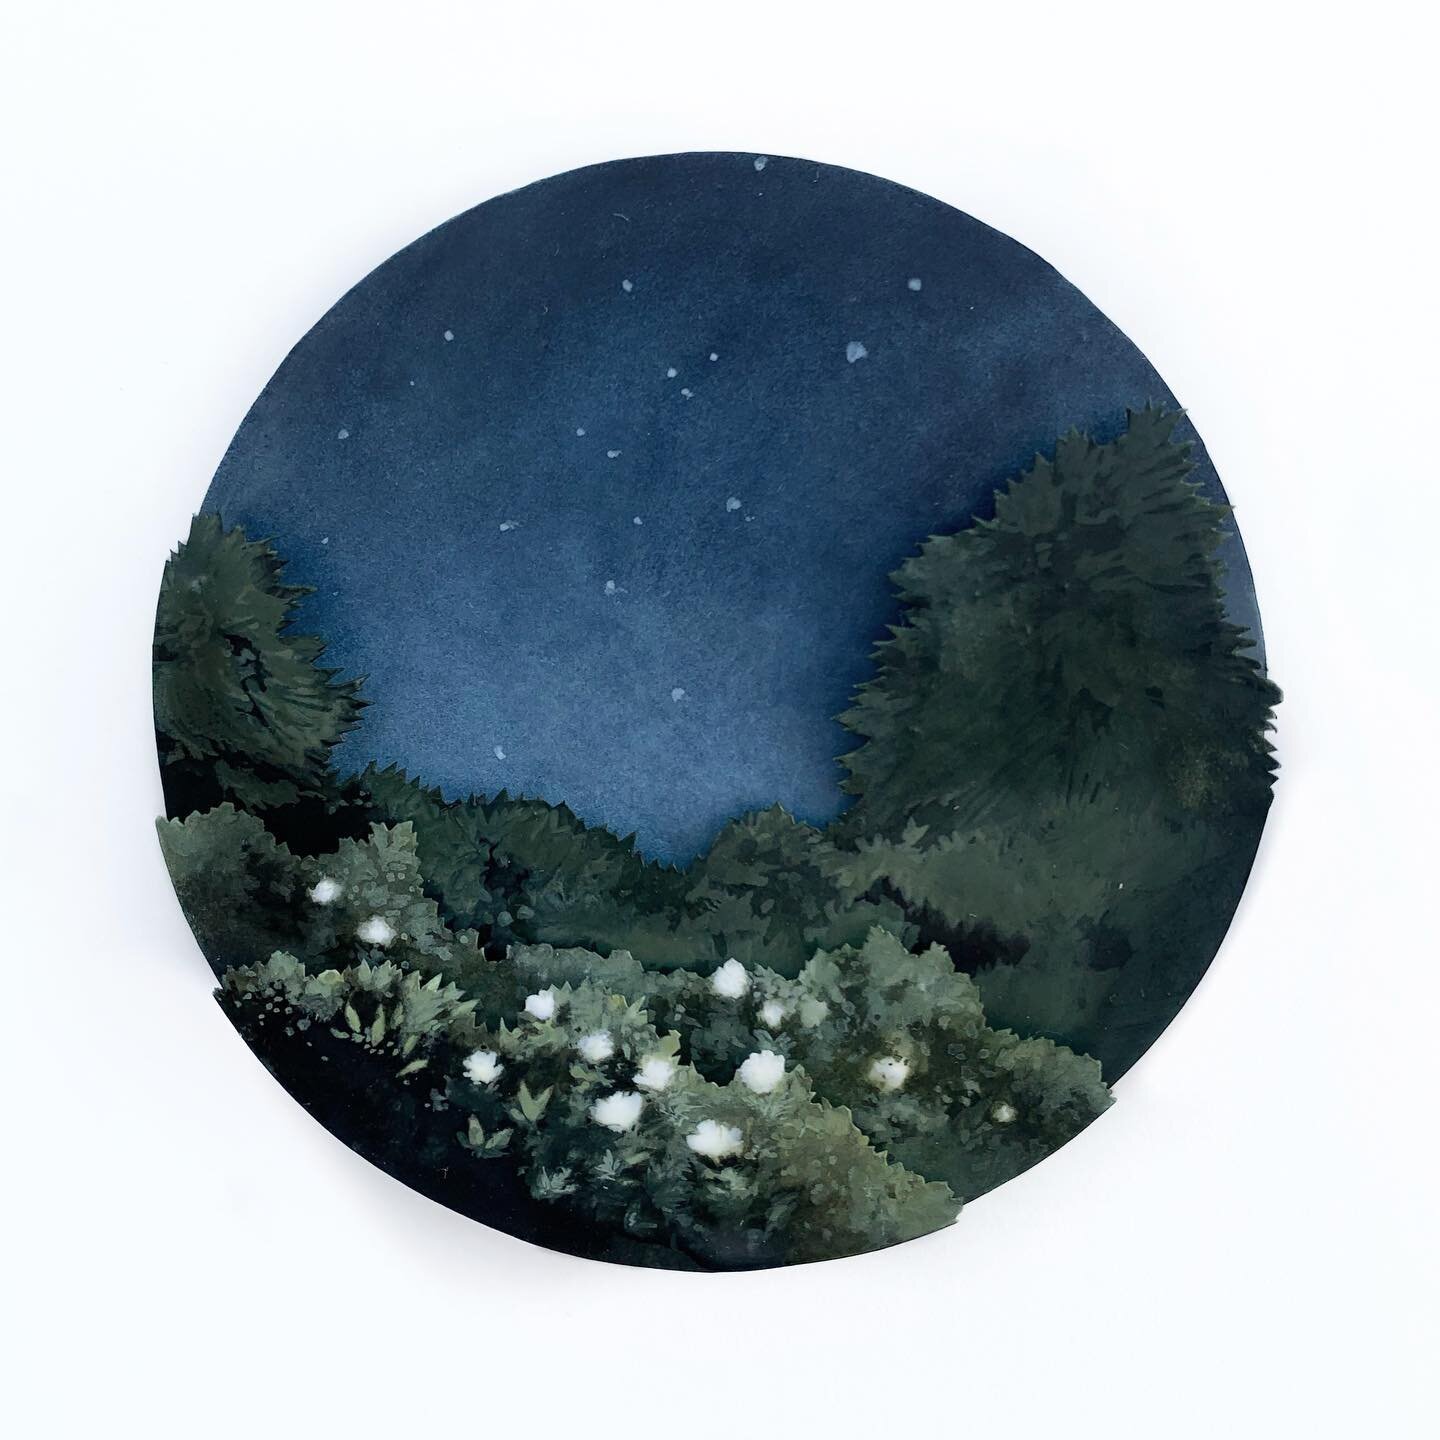 One of my pieces from a recent showcase at @antlerpdx 🌌

Portal 3
watercolor on layers on hand-cut paper on panel, sealed with encaustic
4&rdquo; diameter x 1.125&rdquo; deep